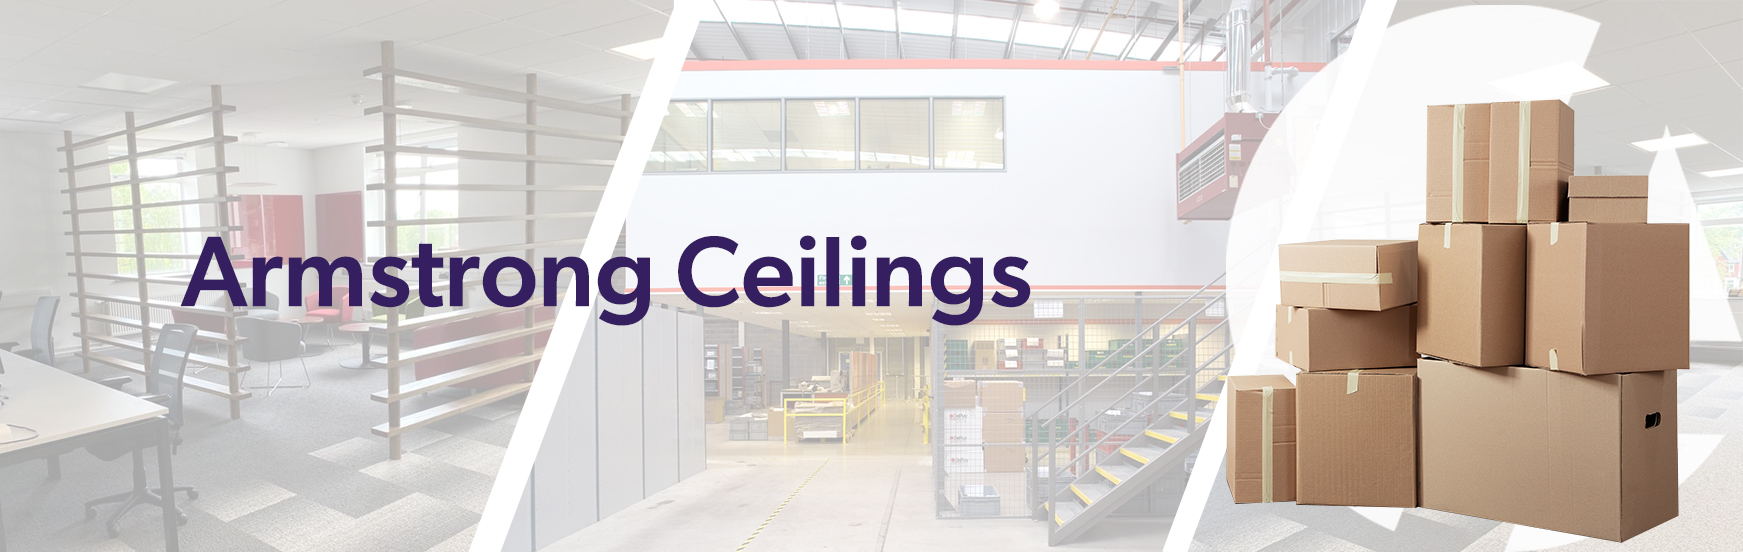 ceilings armstrong